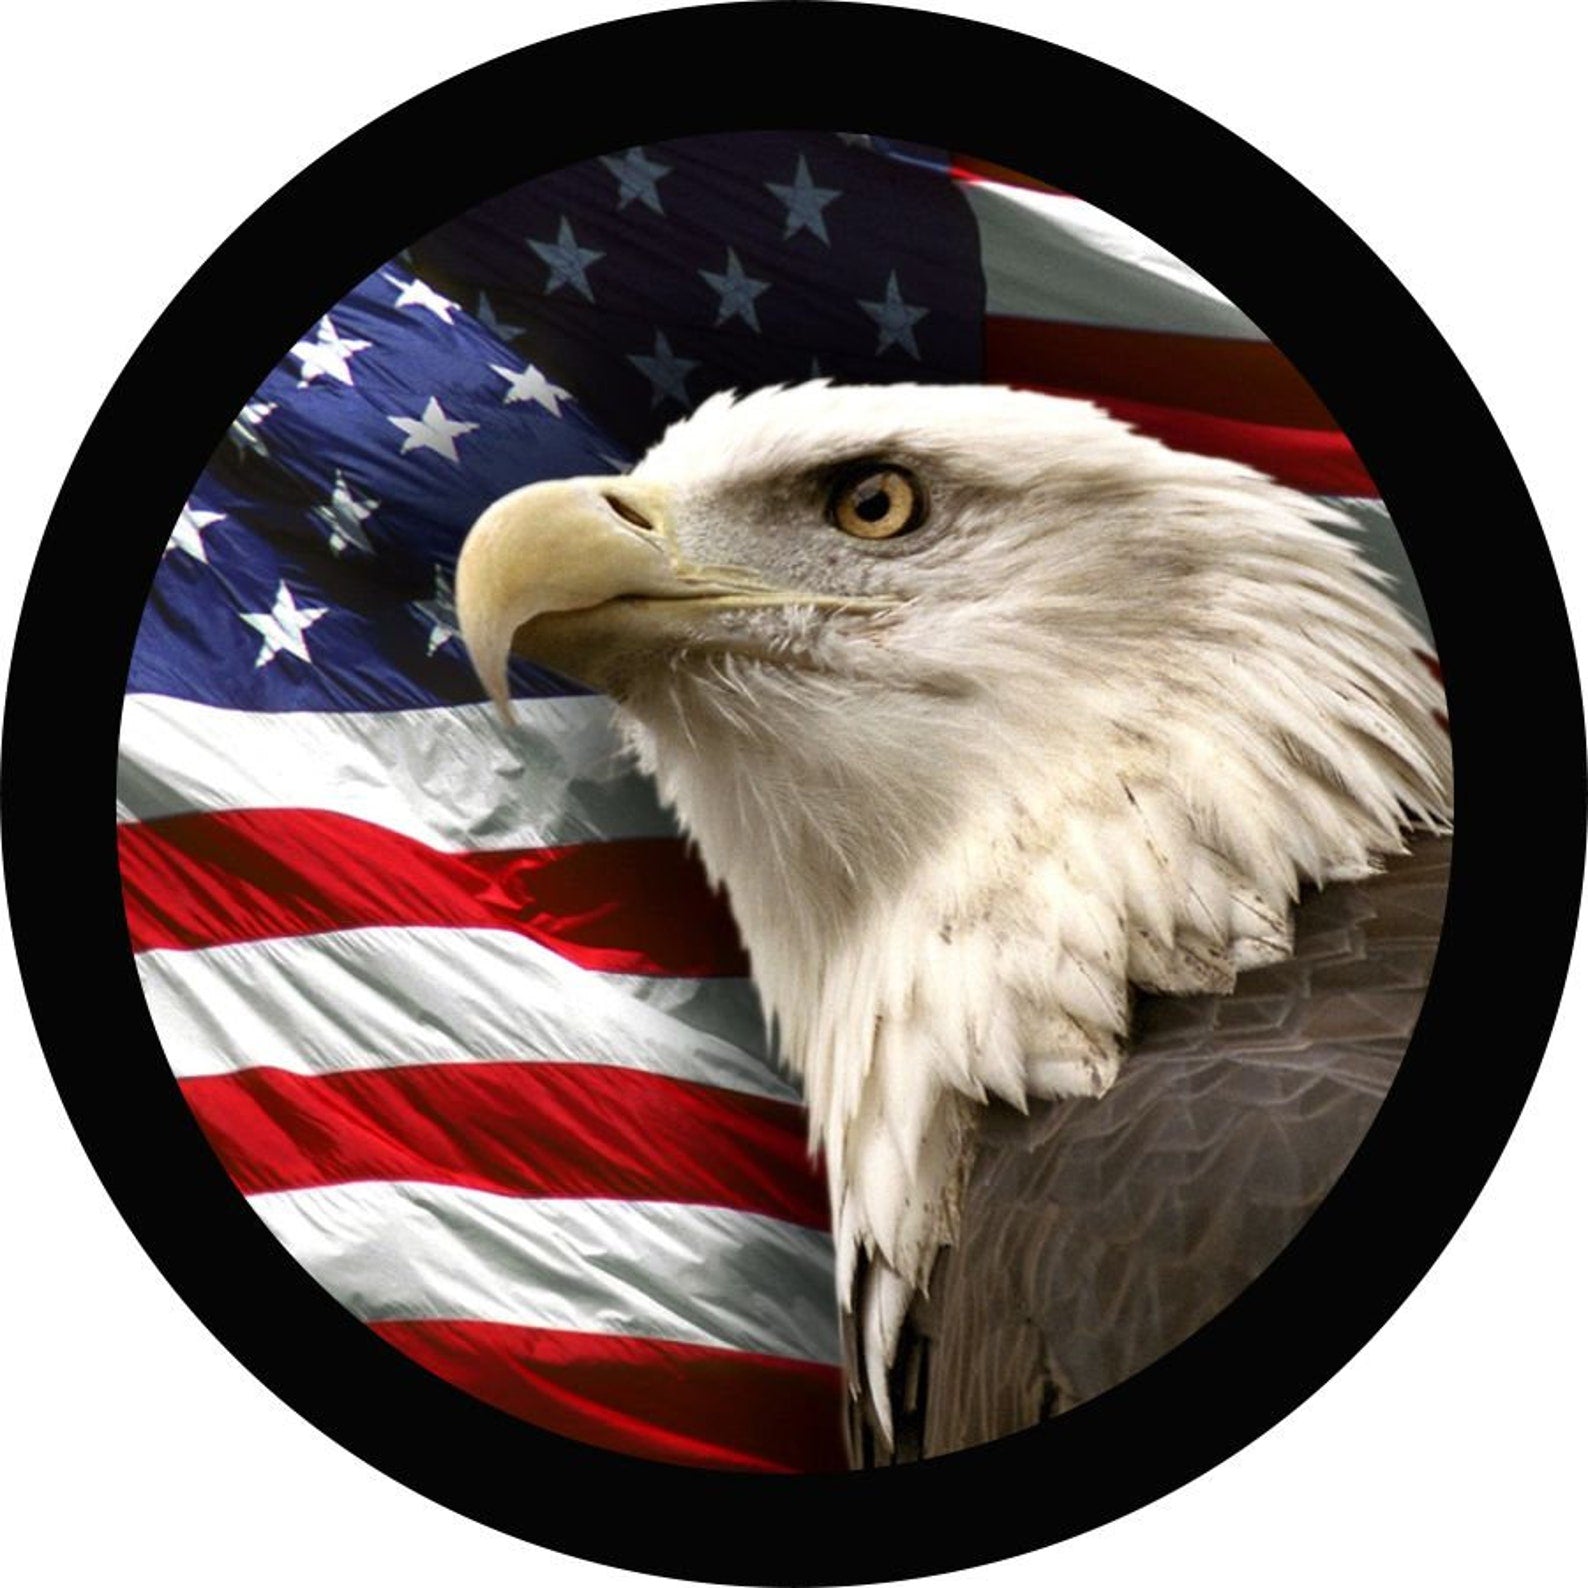 American eagle head with an American flag flying in the background on a spare tire cover